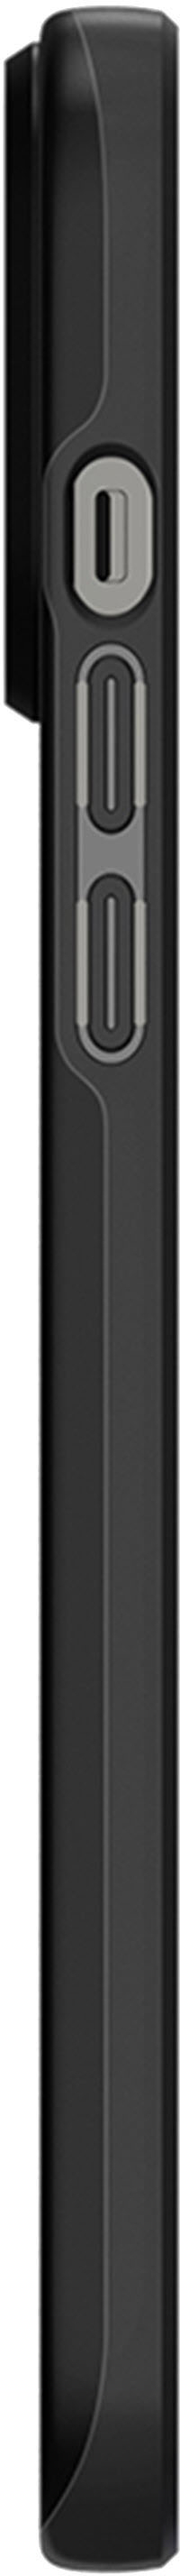 Spigen - Thin Fit Hard Shell Case for Apple iPhone 13 Pro Max & iPhone 12 Pro Max - Black